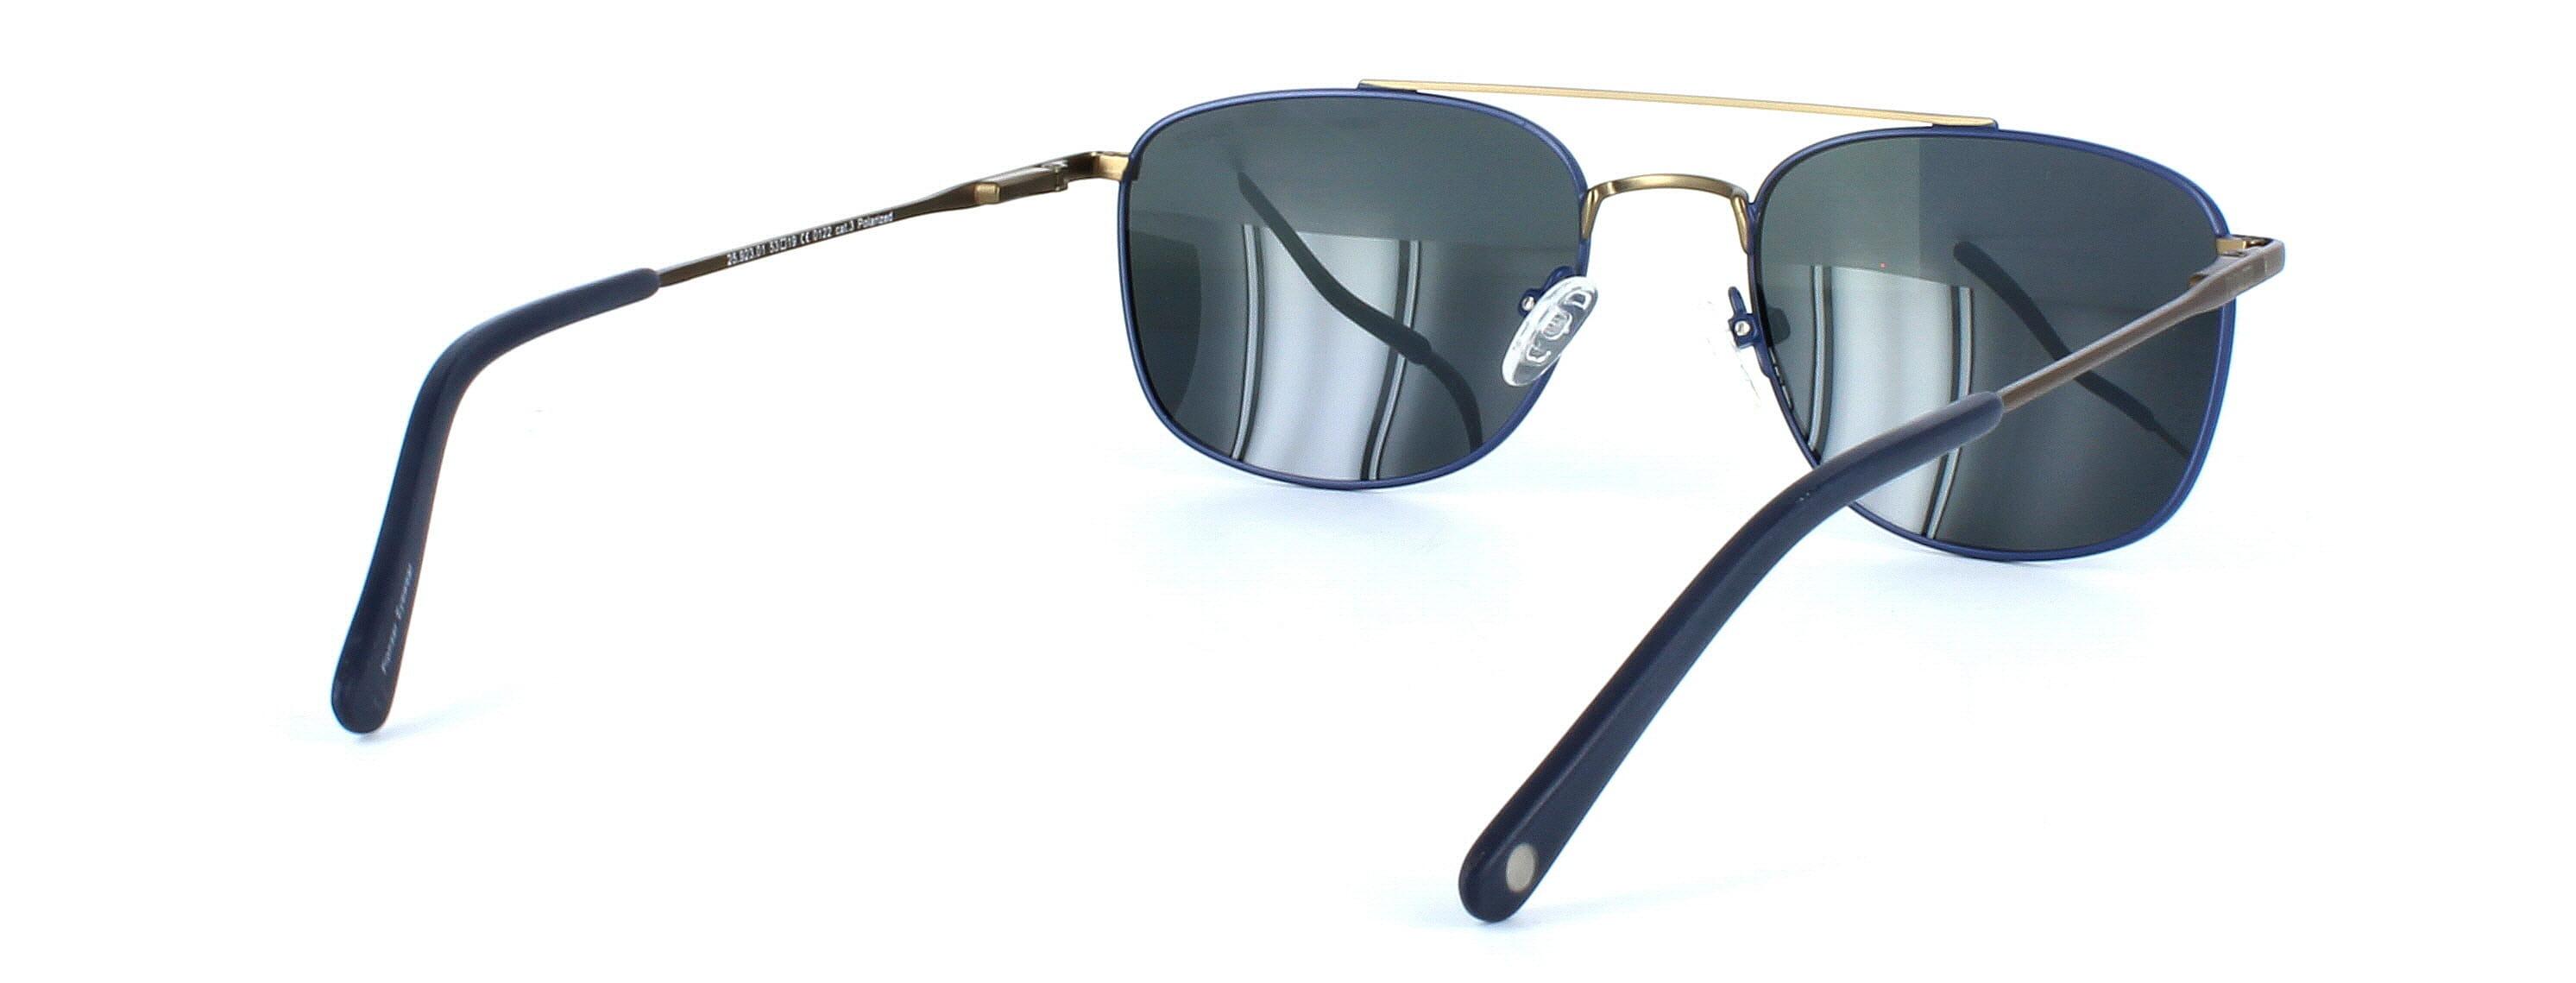 Carlo - Unisex 2-tone aviator style sunglasses here in blue and bronze - image view 2